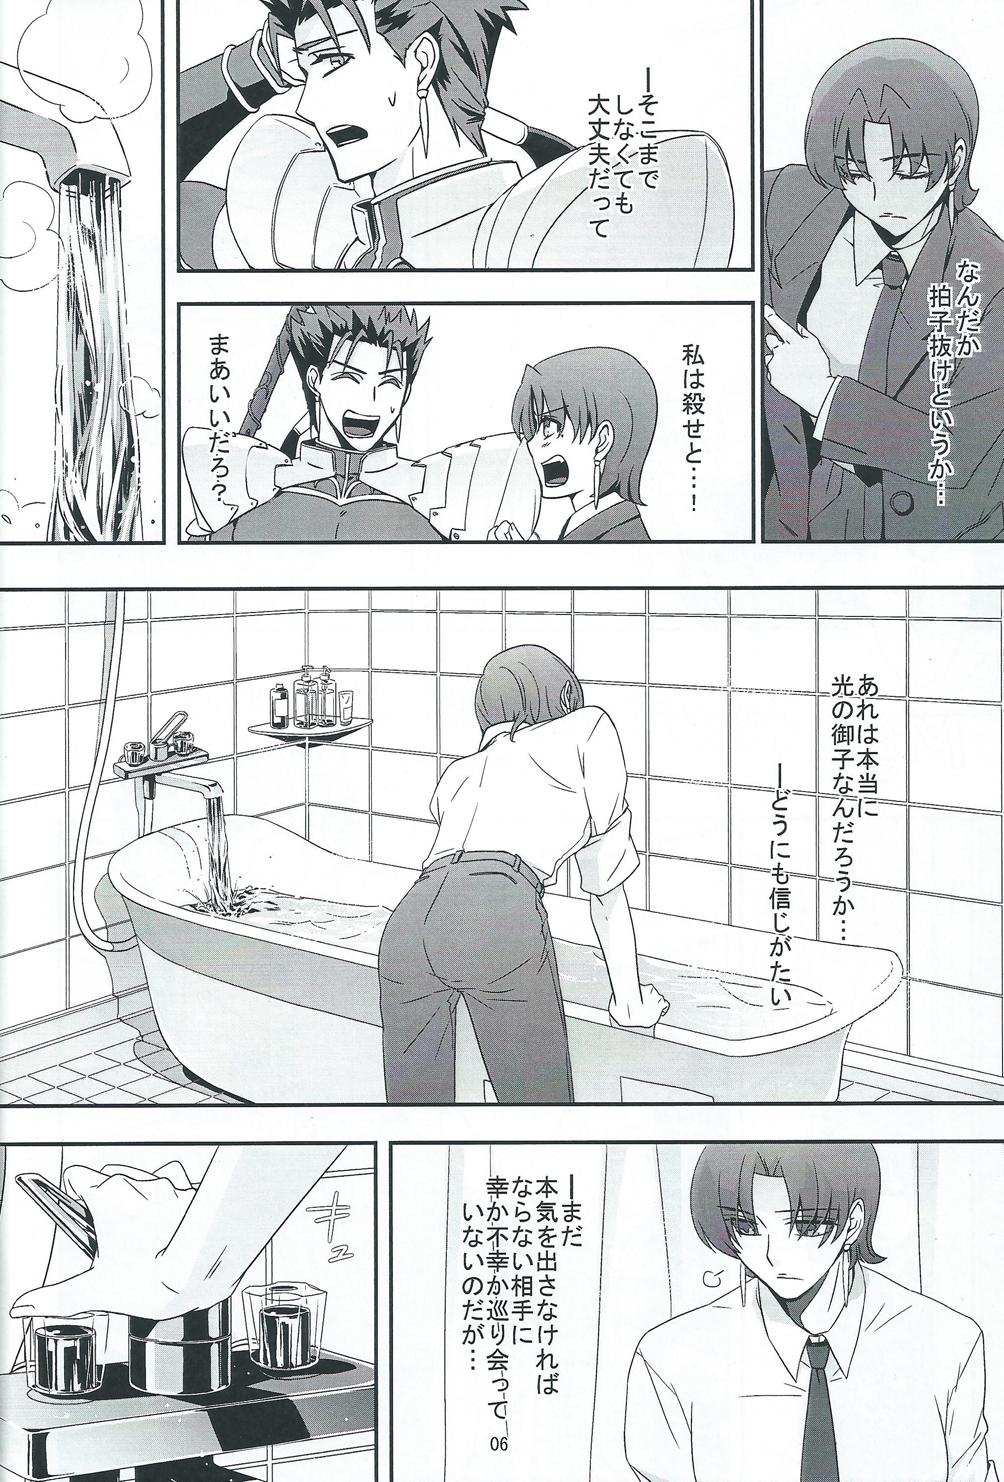 Hottie My Heart Goes Bang - Fate hollow ataraxia Instagram - Page 5